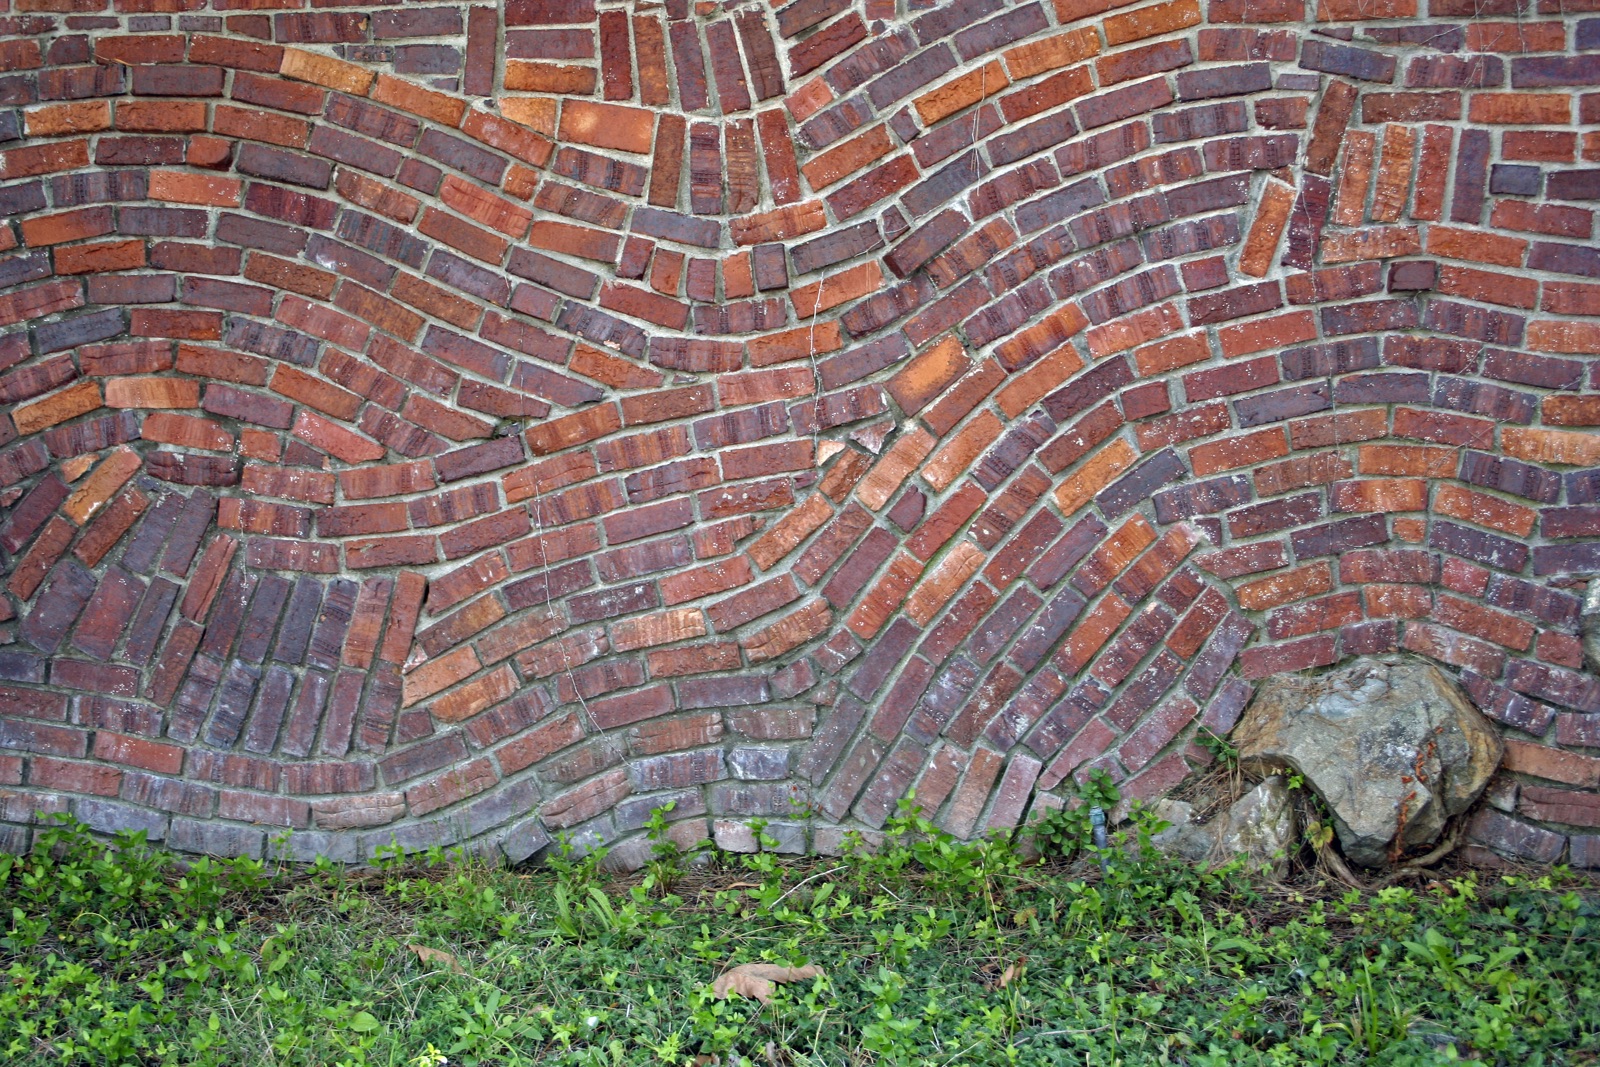 Image of a brick wall, with bricks curving in different directions.